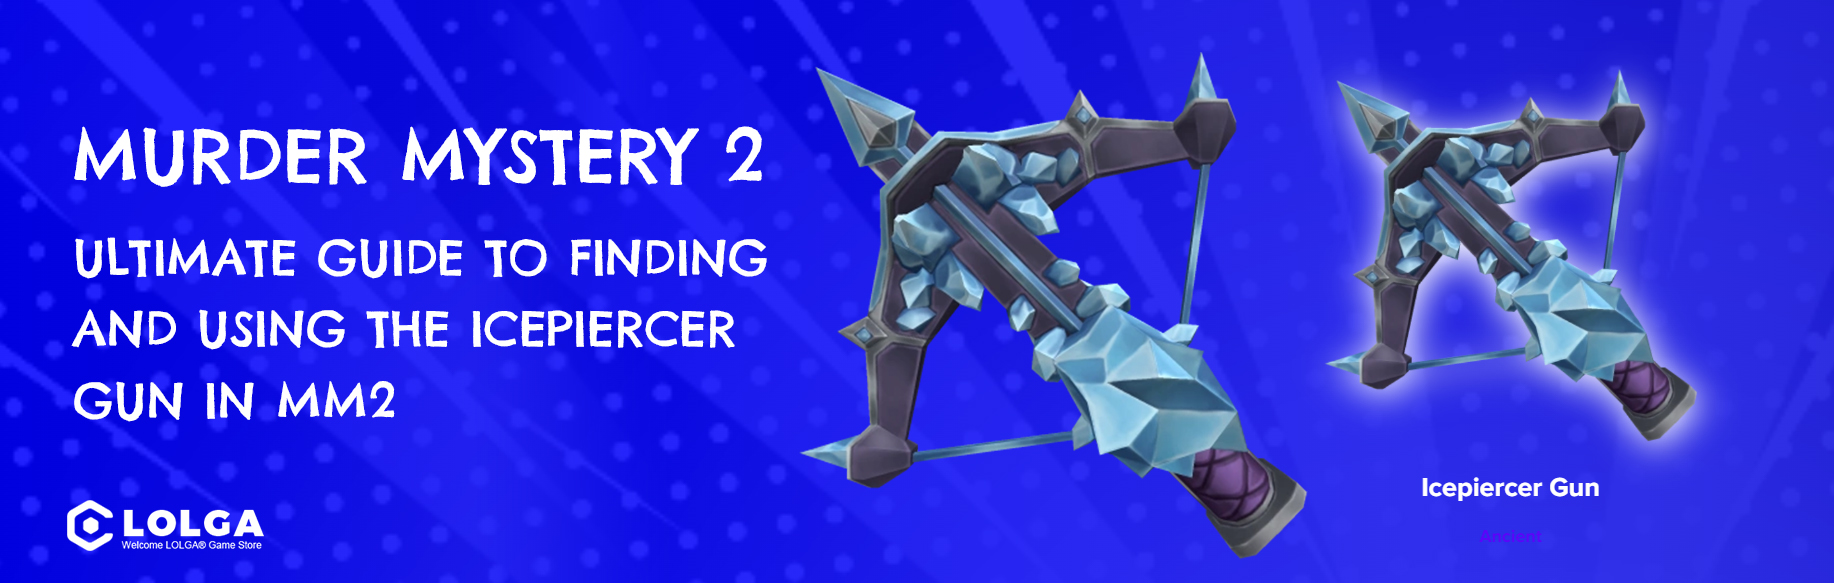 Ultimate Guide to Finding and Using the Icepiercer Gun in MM2